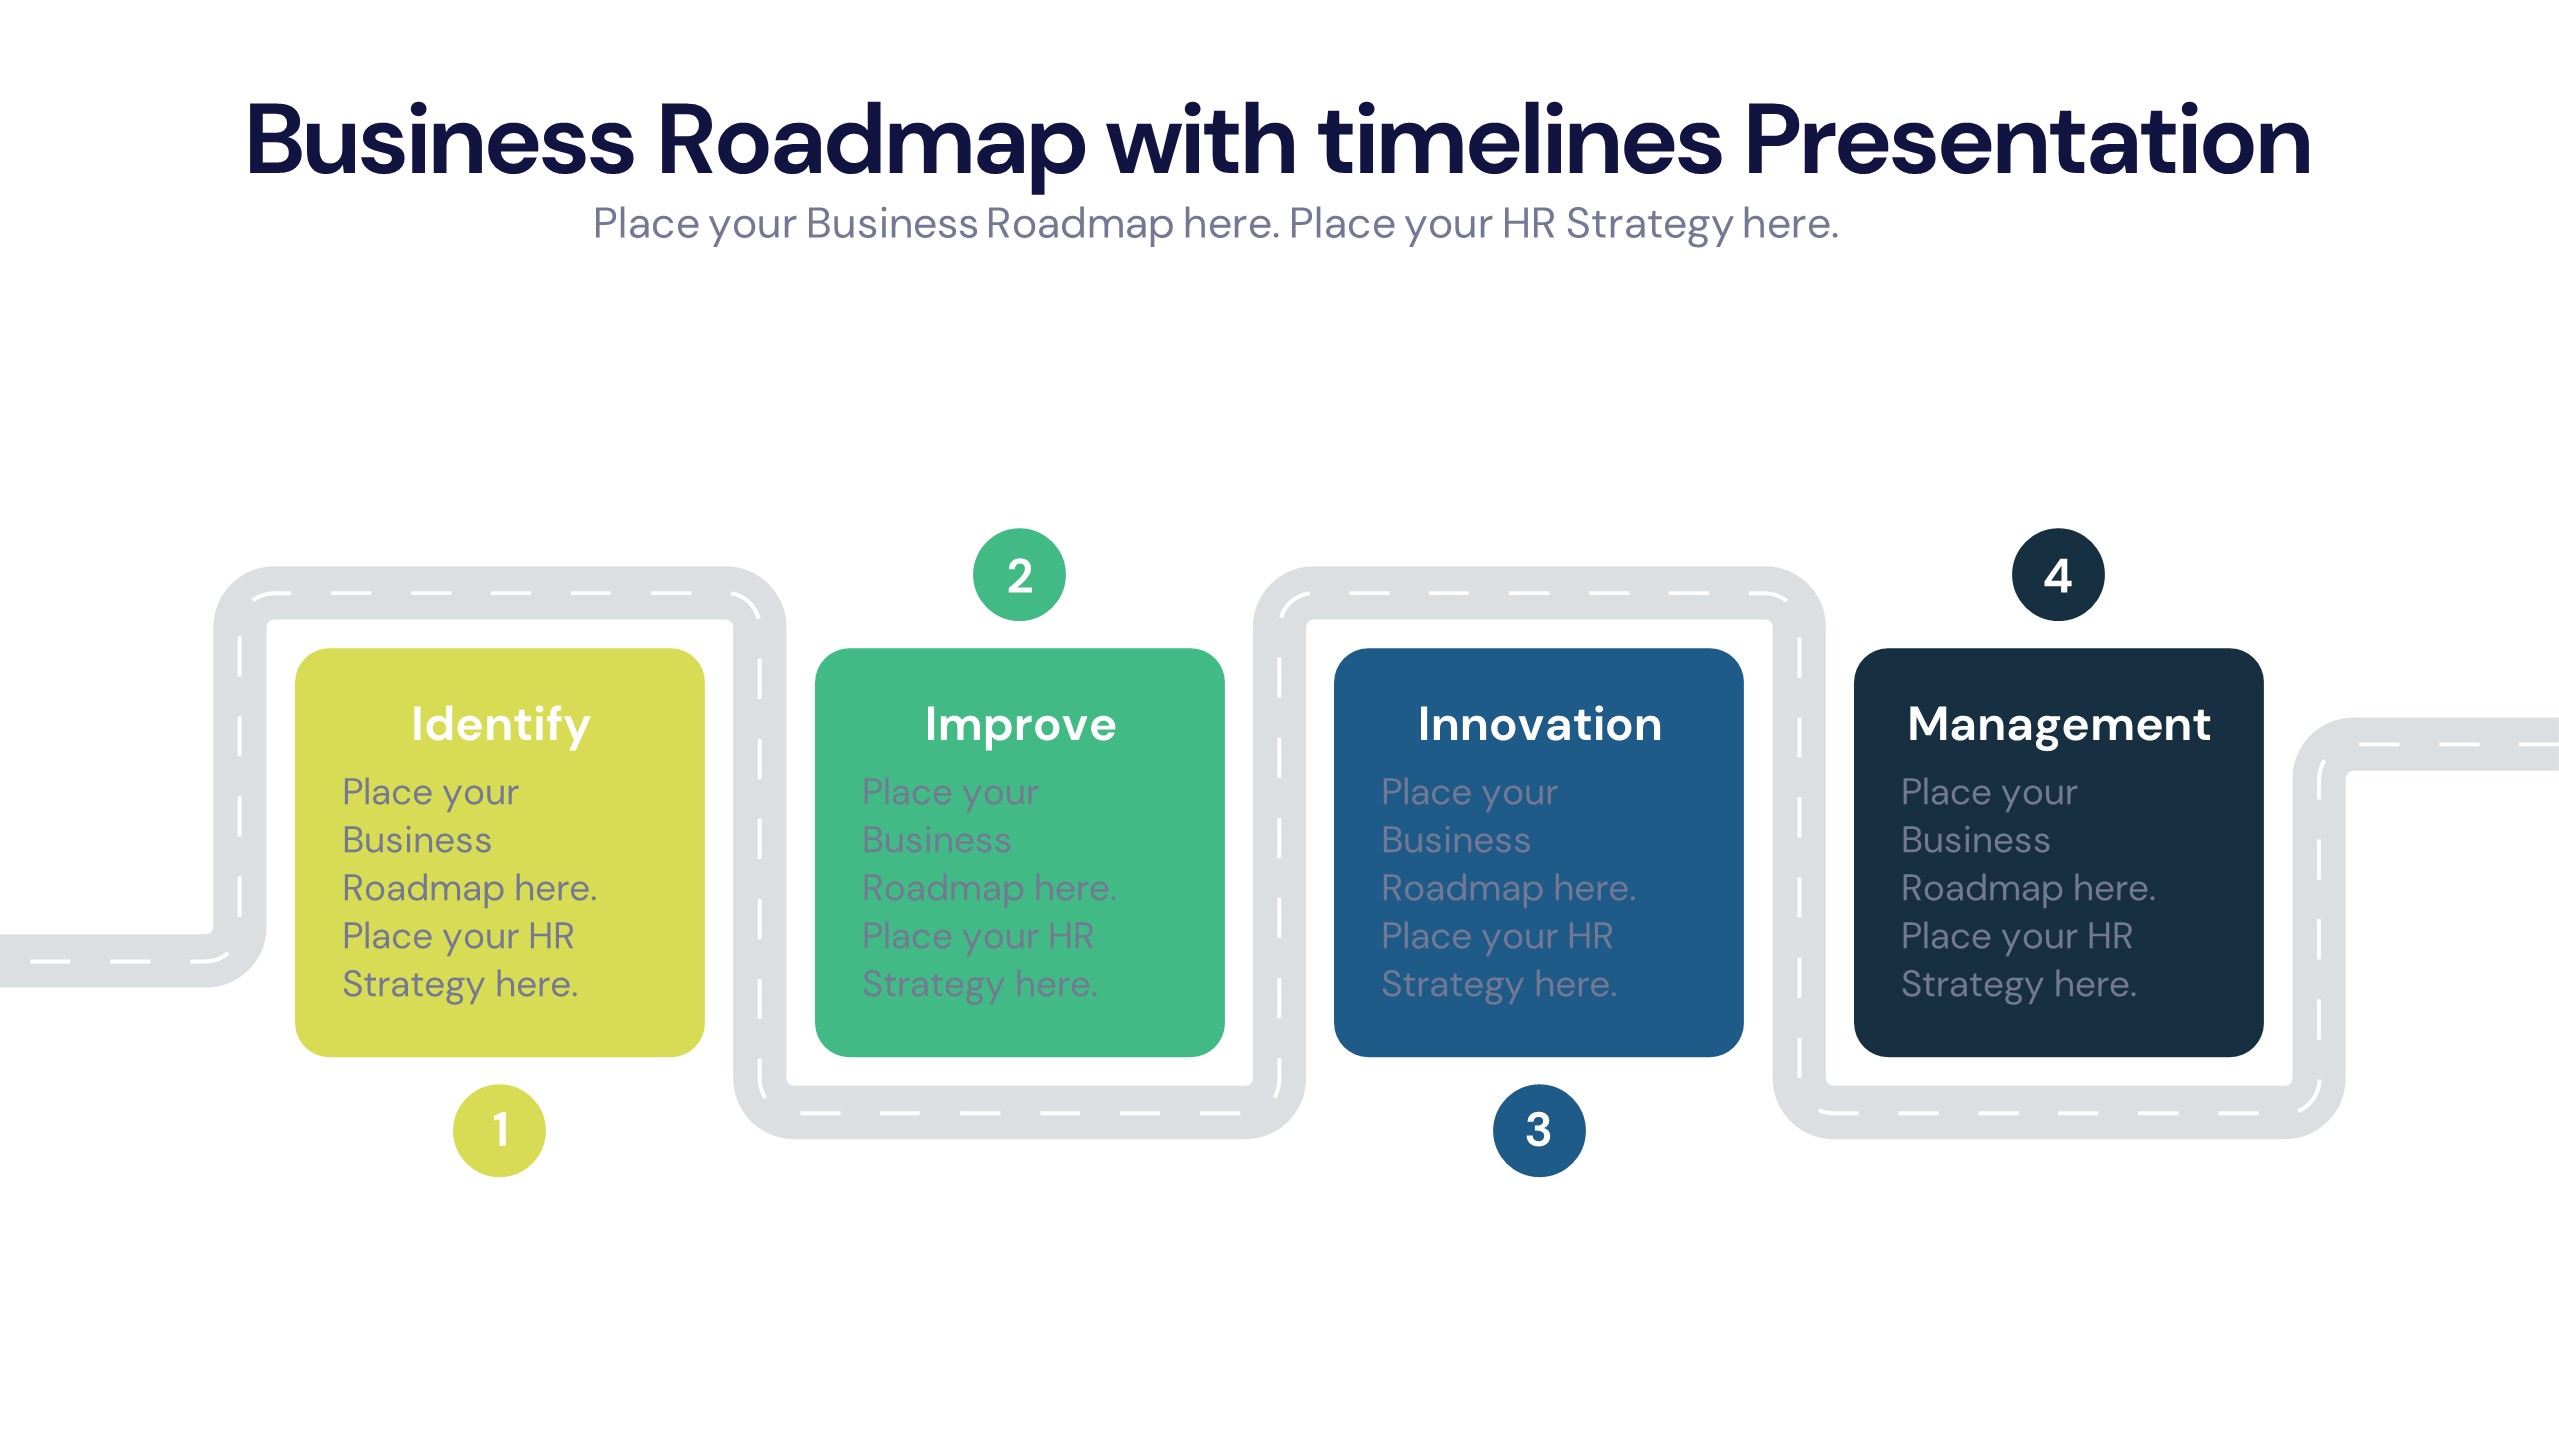 Business Roadmap with timelines Presentation